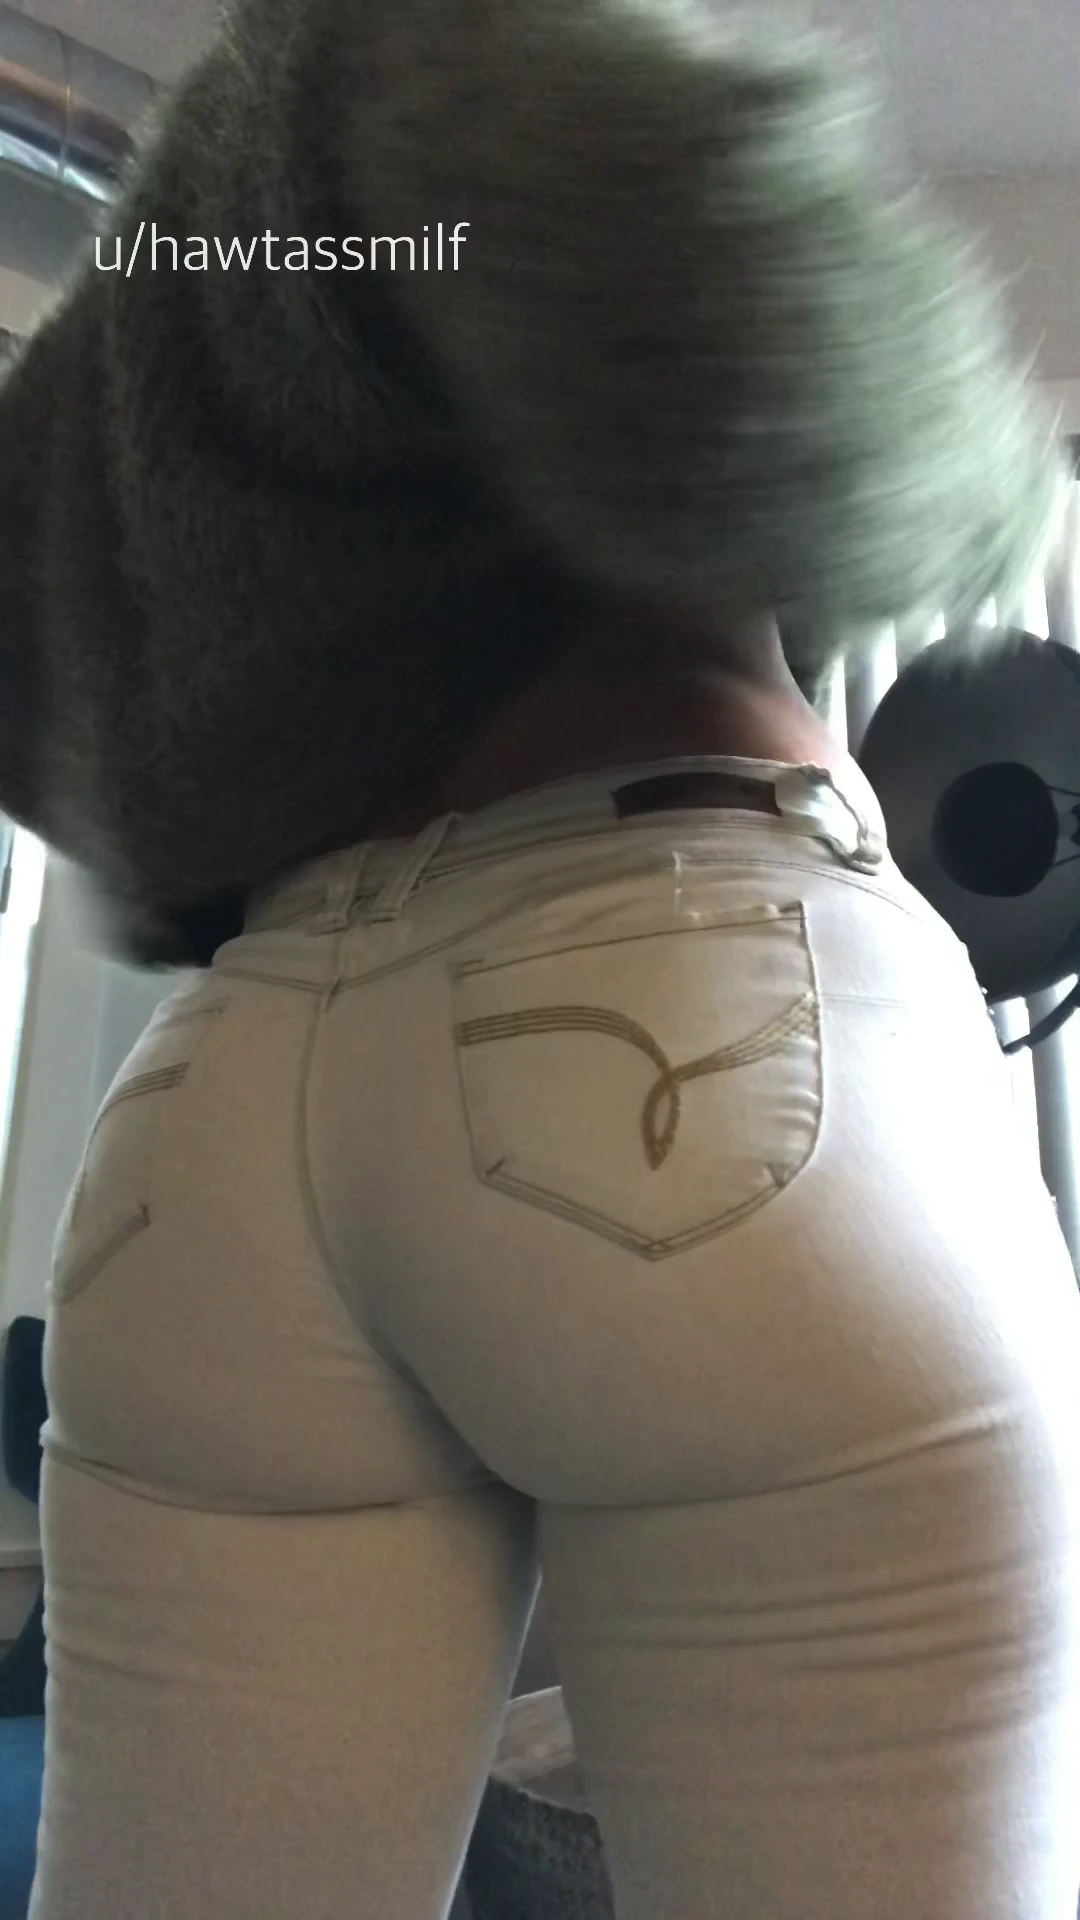 imagine seeing that much ass while dropping off your kids at school